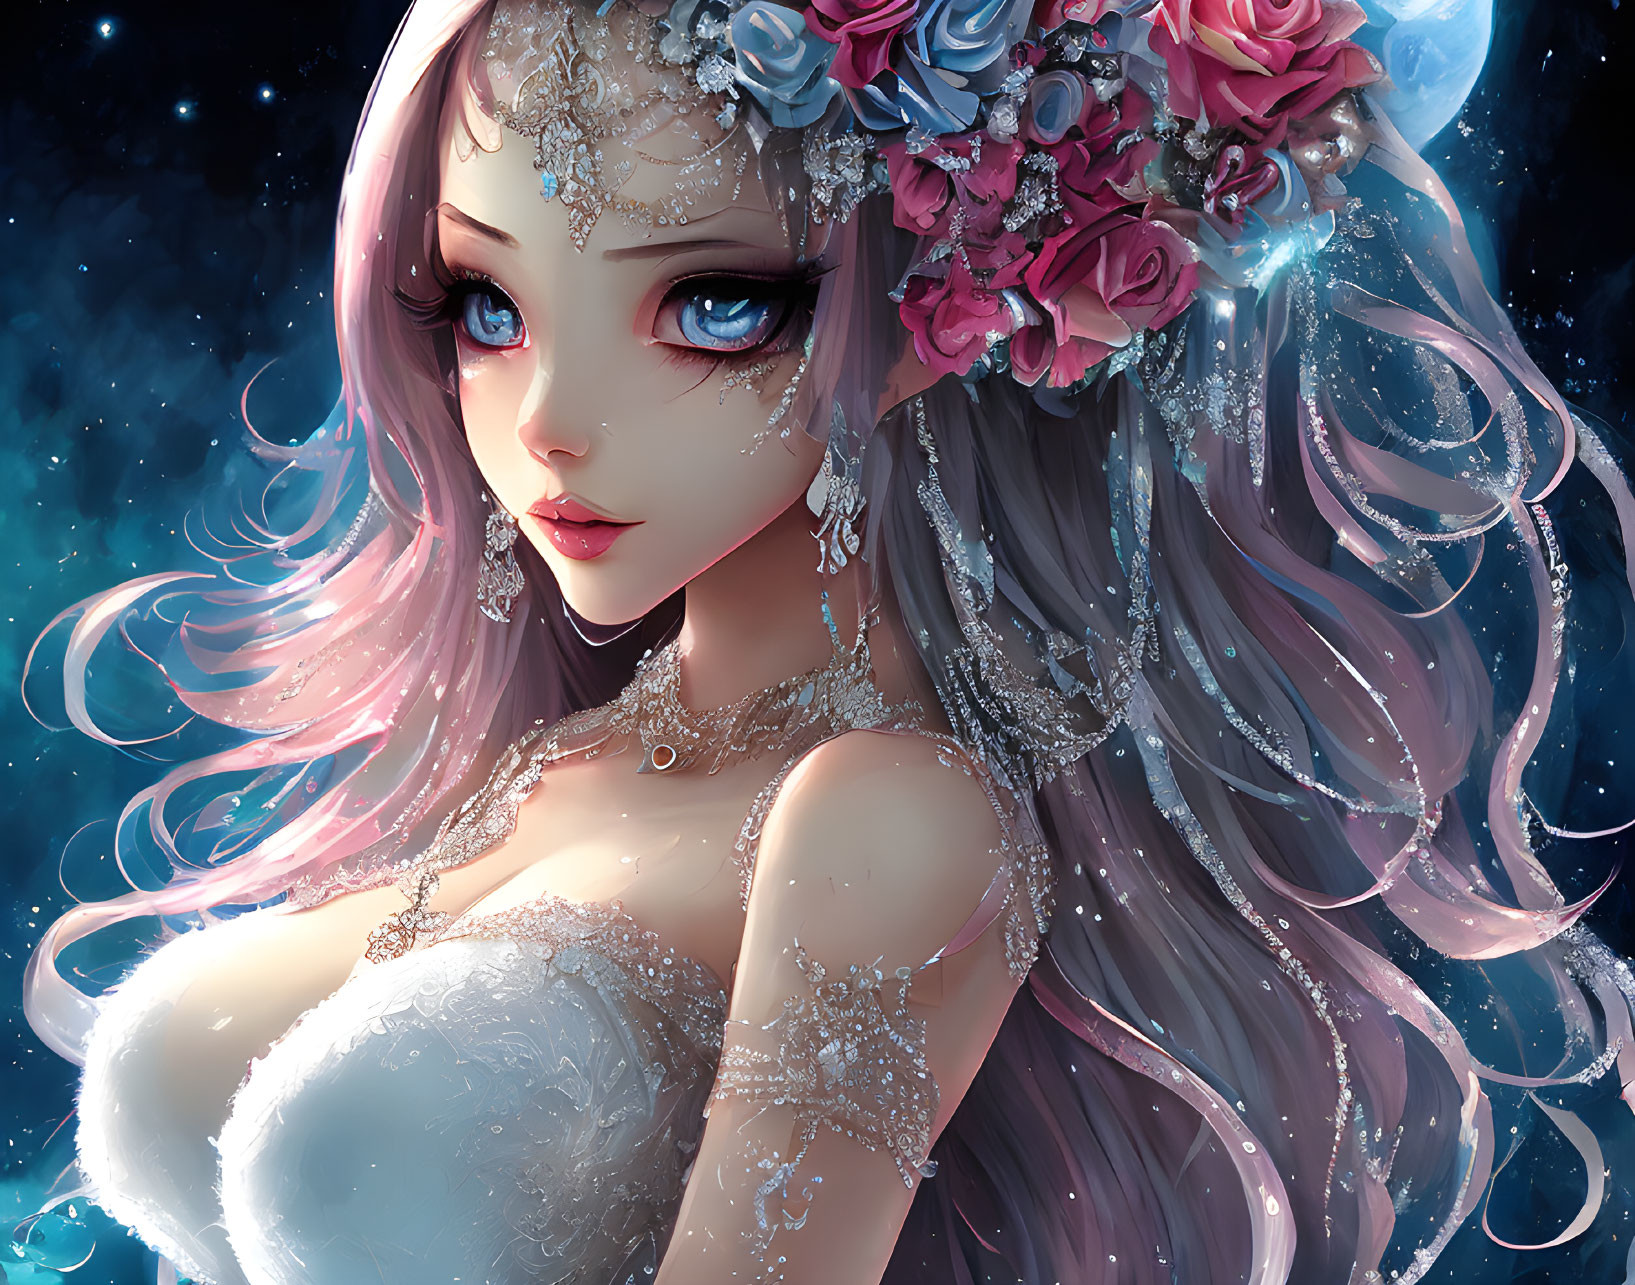 Fantasy girl illustration with large eyes, flower crown, jewelry, and starry night background